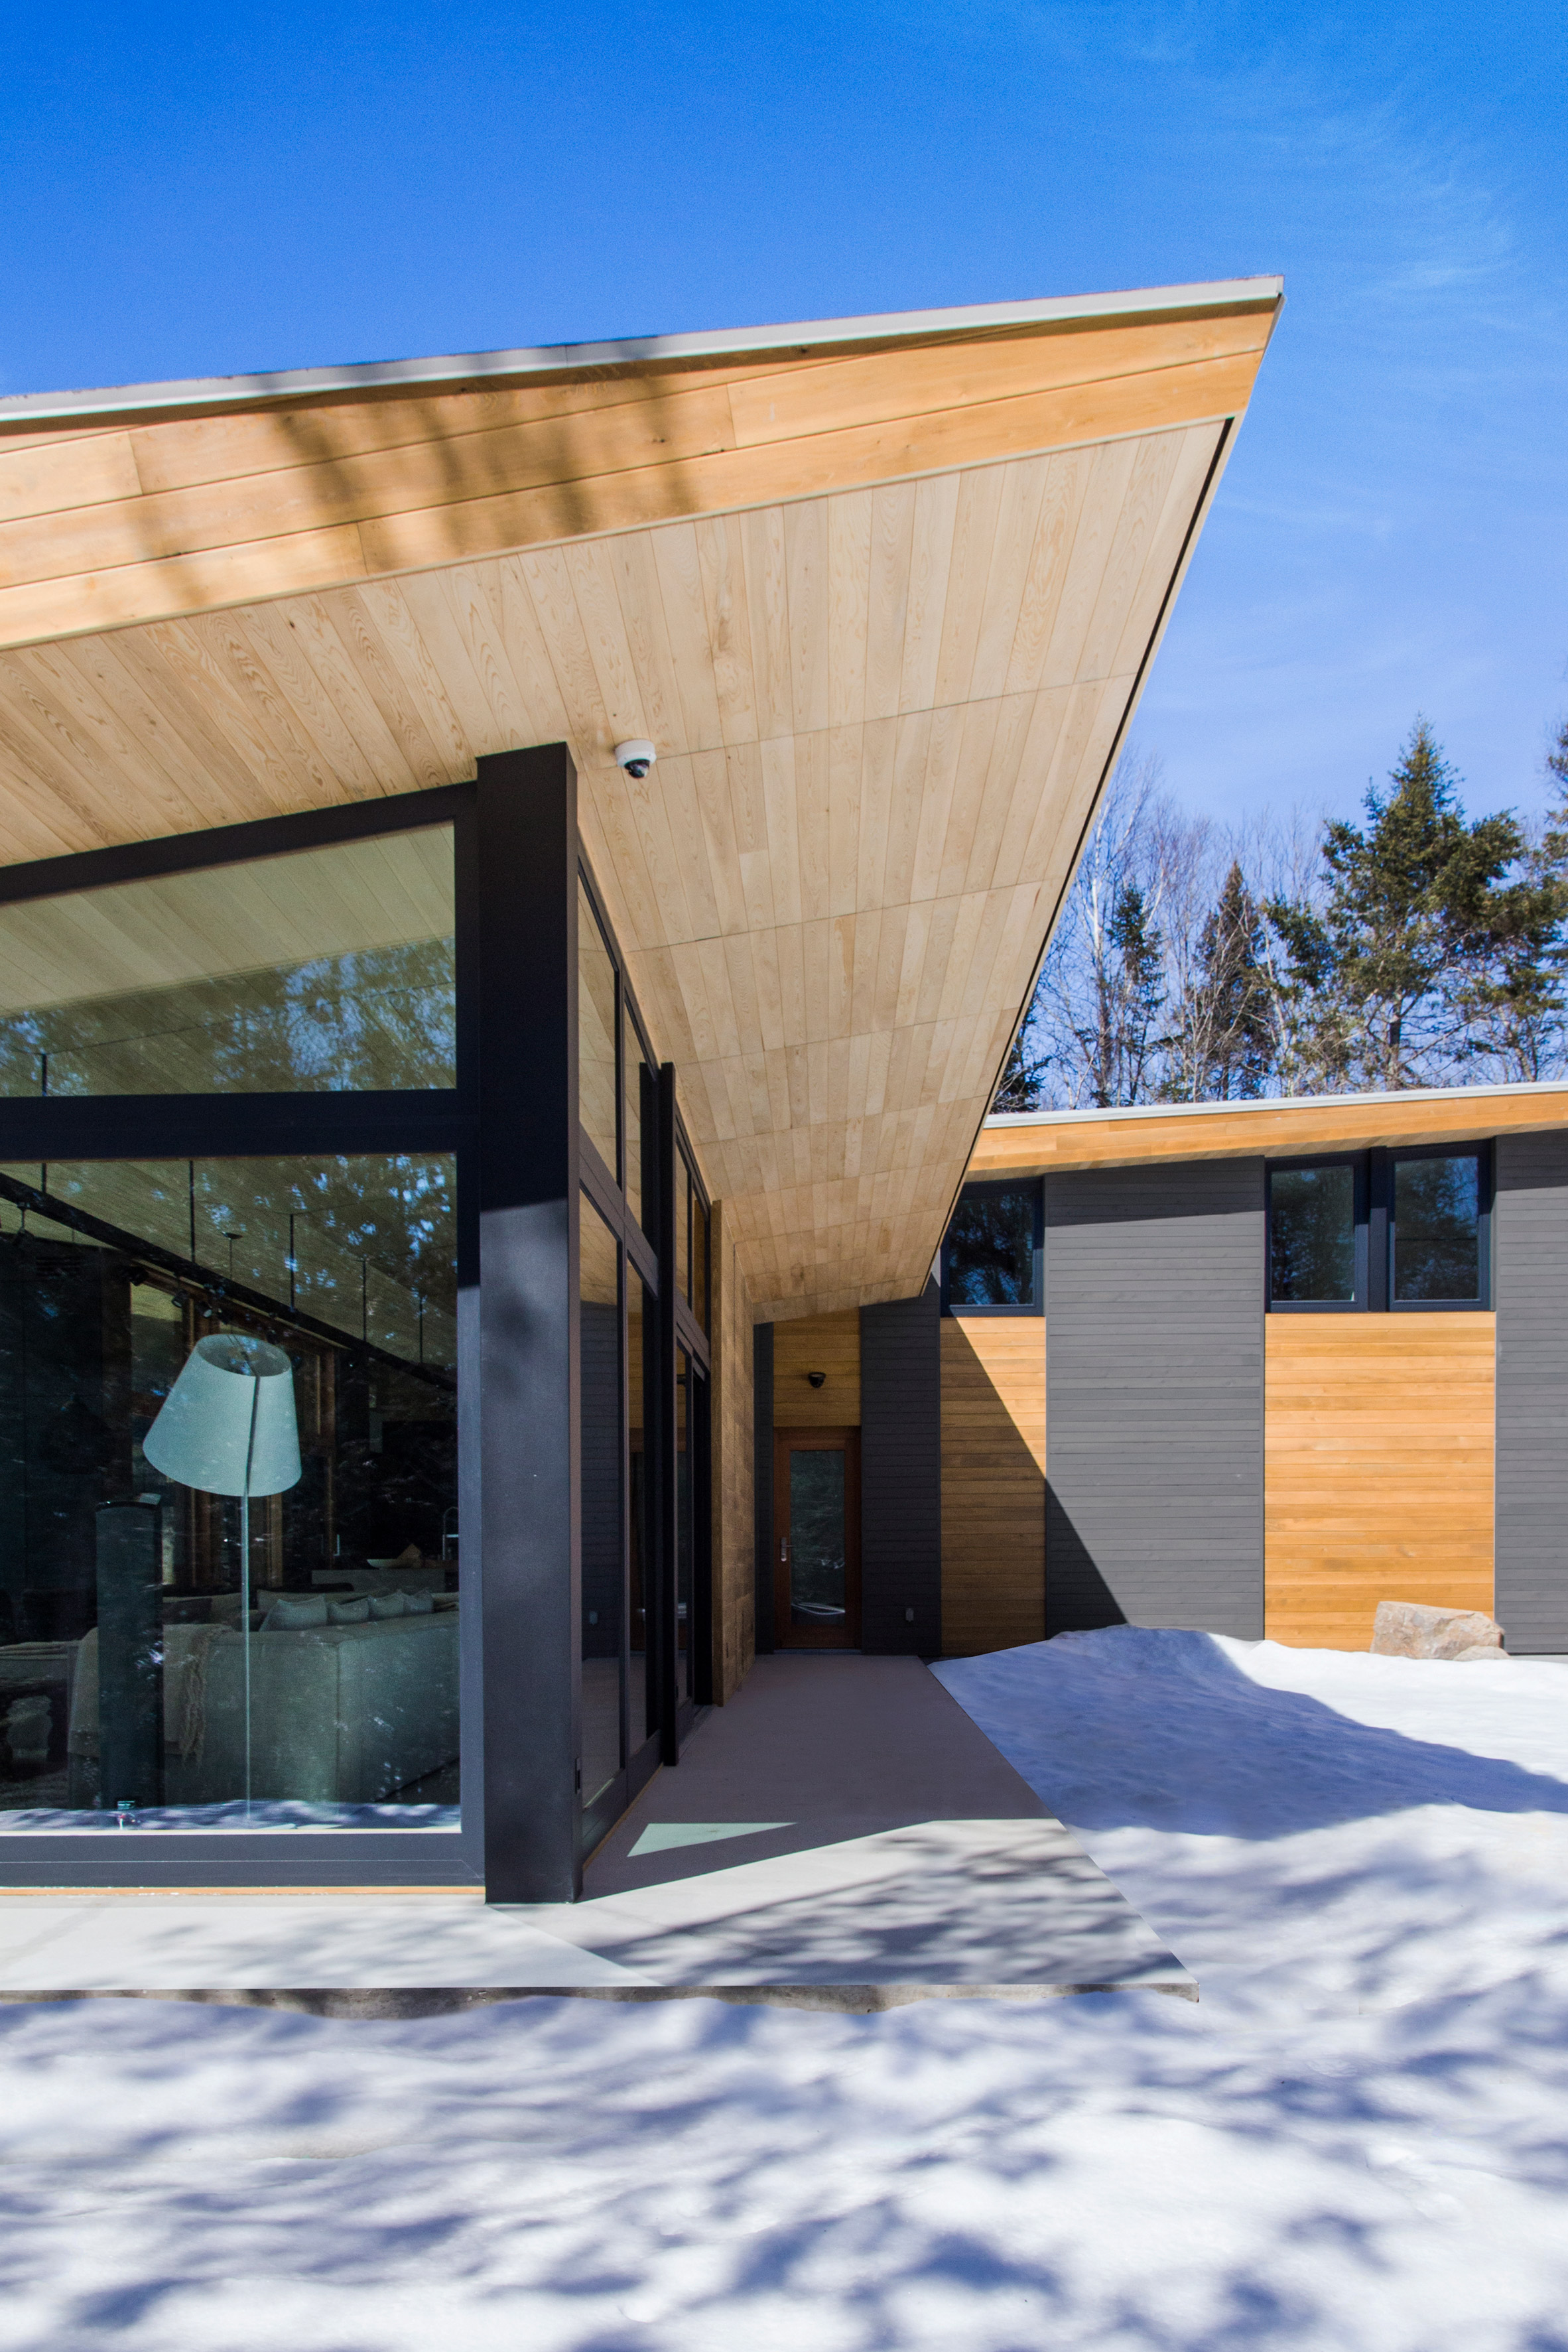 Bird's wings inform V-shaped roof over Quebec ski chalet by YH2